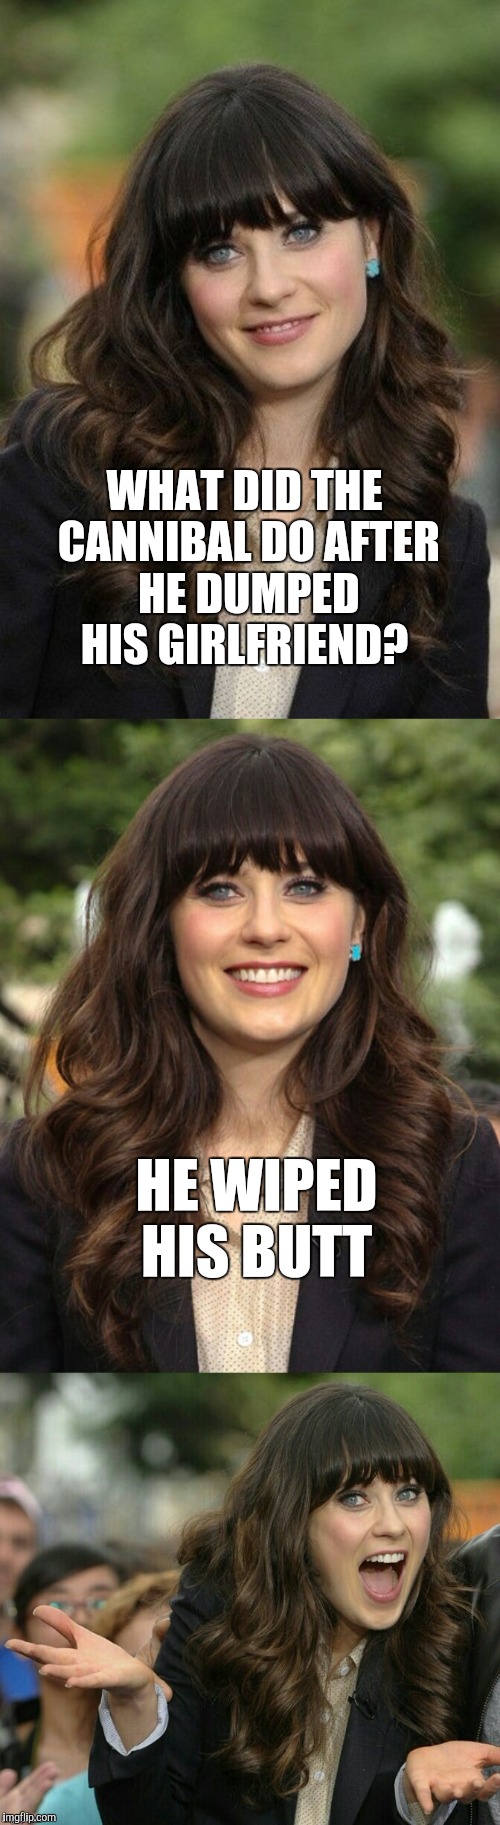 Zooey Deschanel joke template  | WHAT DID THE CANNIBAL DO AFTER HE DUMPED HIS GIRLFRIEND? HE WIPED HIS BUTT | image tagged in zooey deschanel joke template,jbmemegeek,zooey deschanel,bad puns,cannibal | made w/ Imgflip meme maker